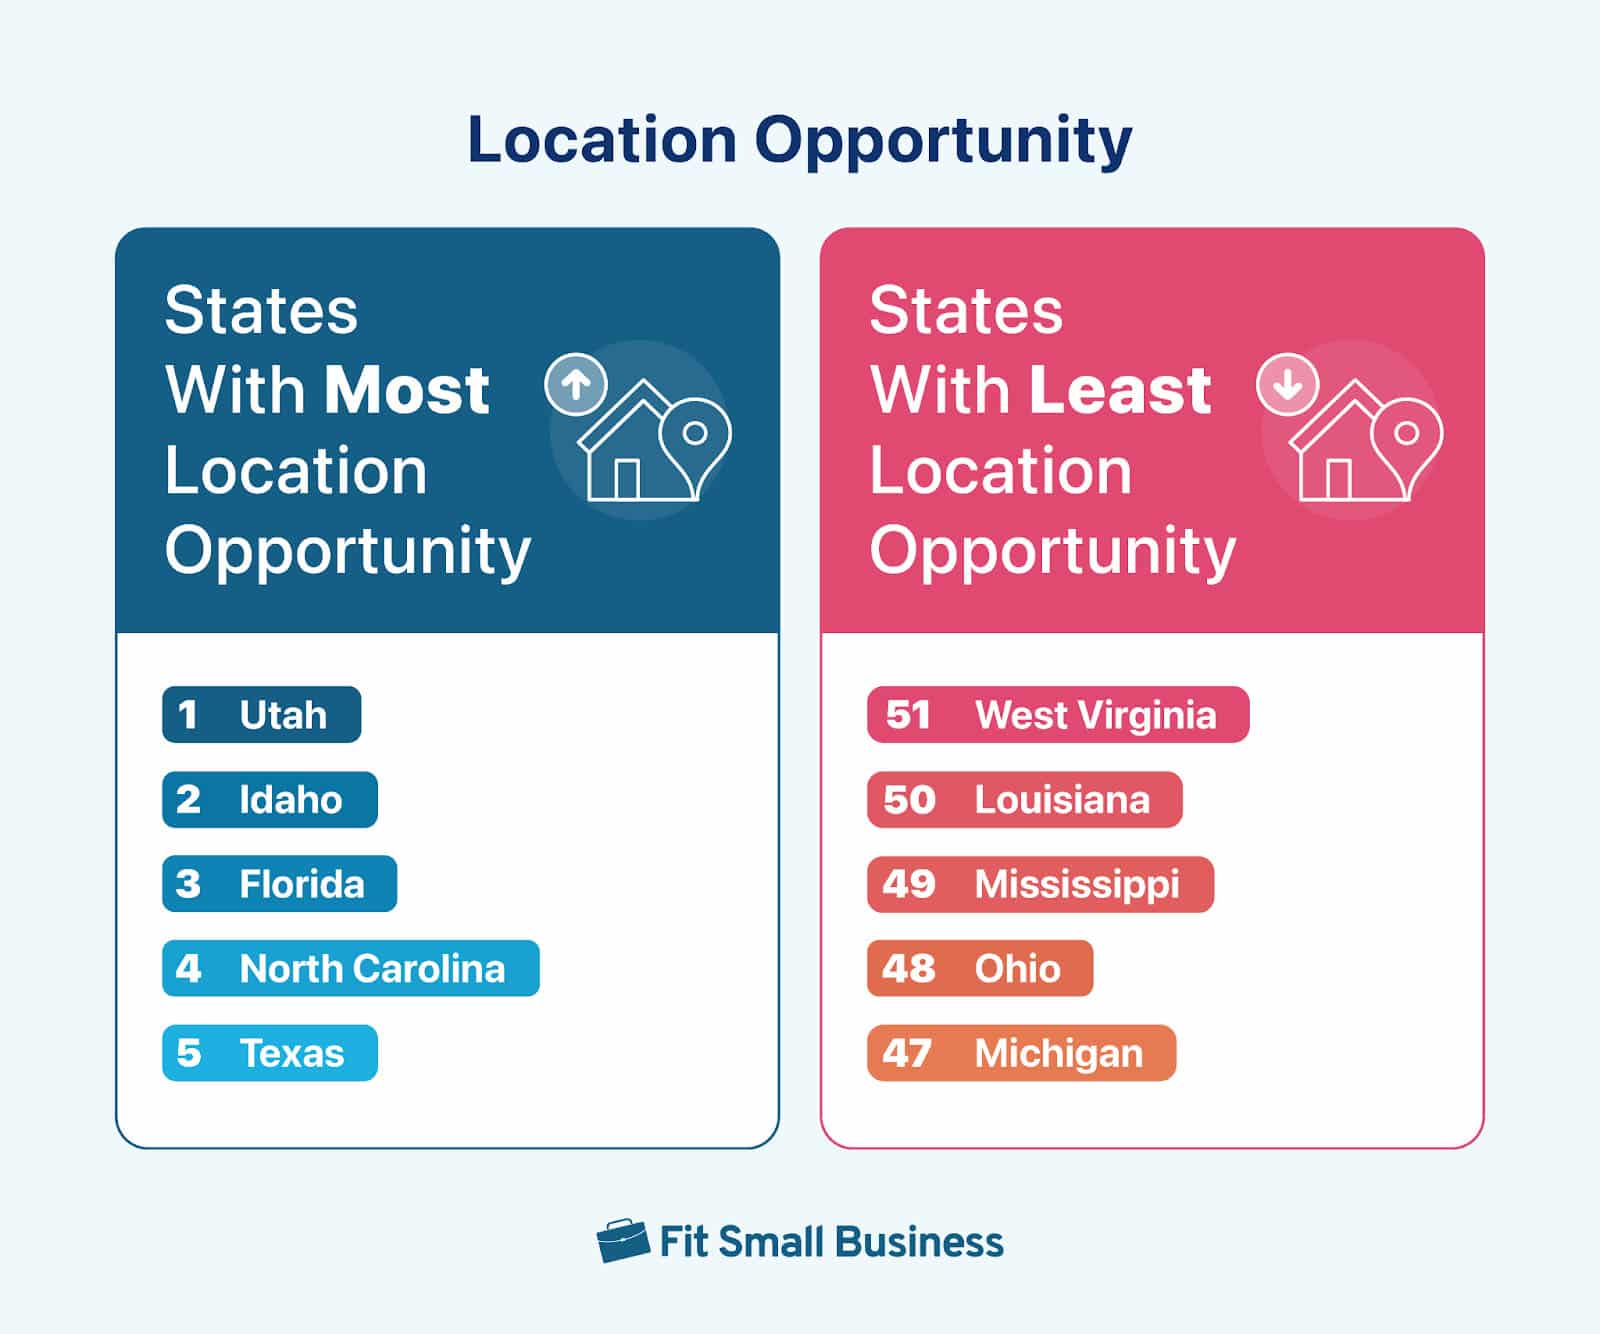 Five best and worst states ranking for location opportunity. 